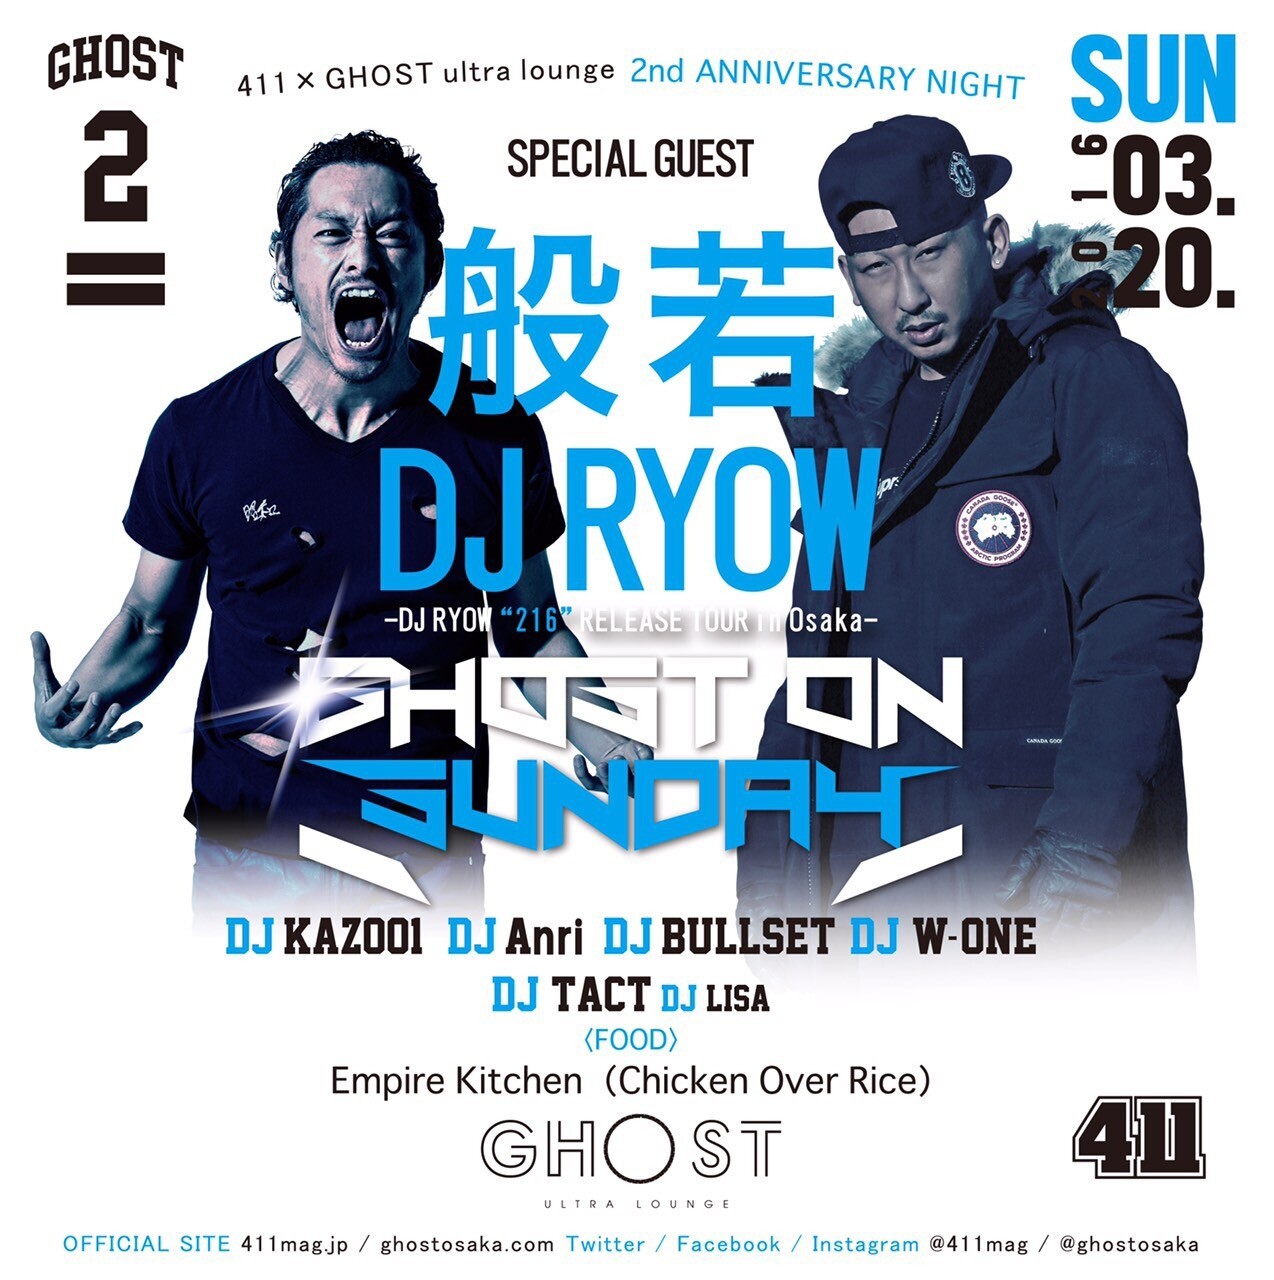 Iflyer 411 Ghost 2nd Anniversary Night Ghost On Sunday ゴーストオンサンデー At Ghost Ultra Lounge Osaka